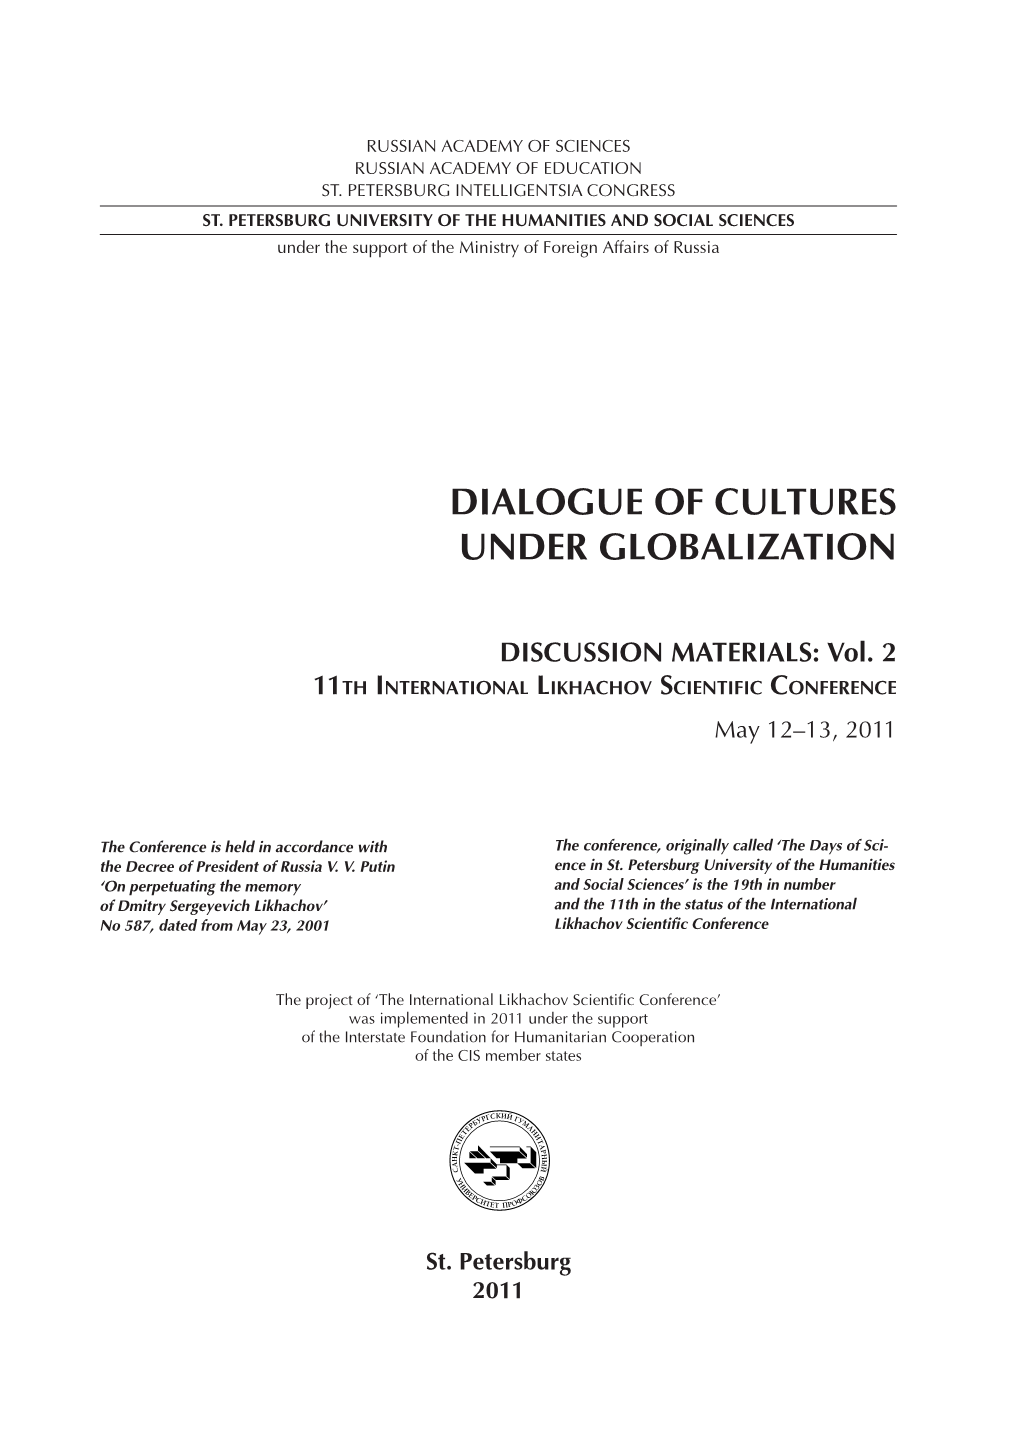 Dialogue of Cultures Under Globalization. Vol. 2 : Discussion Materials of the Д44 11Th Inter National Likhachov Scientiﬁ C Conference, May 12–13, 2011, St